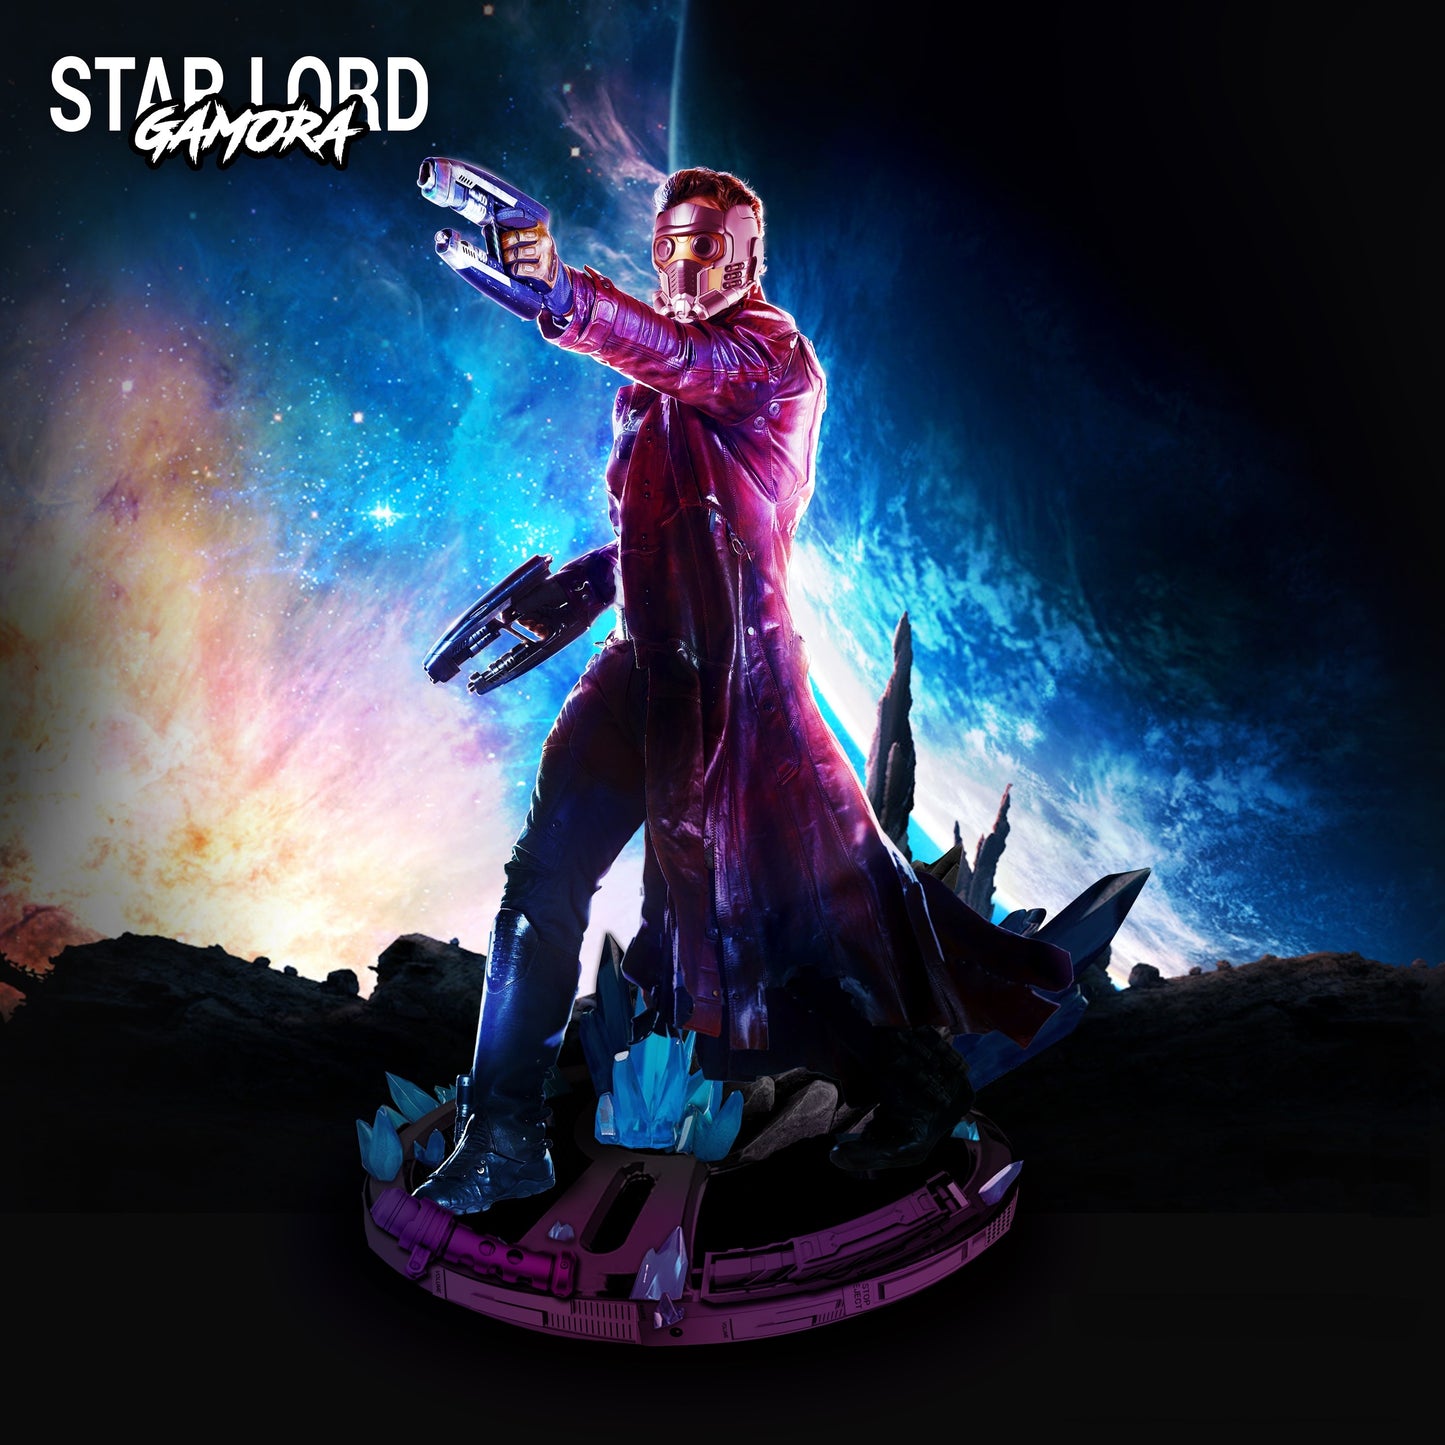 Guardian Of The Galaxy STL Avengers STL File 3D Printing Design Movie Character STL File S043